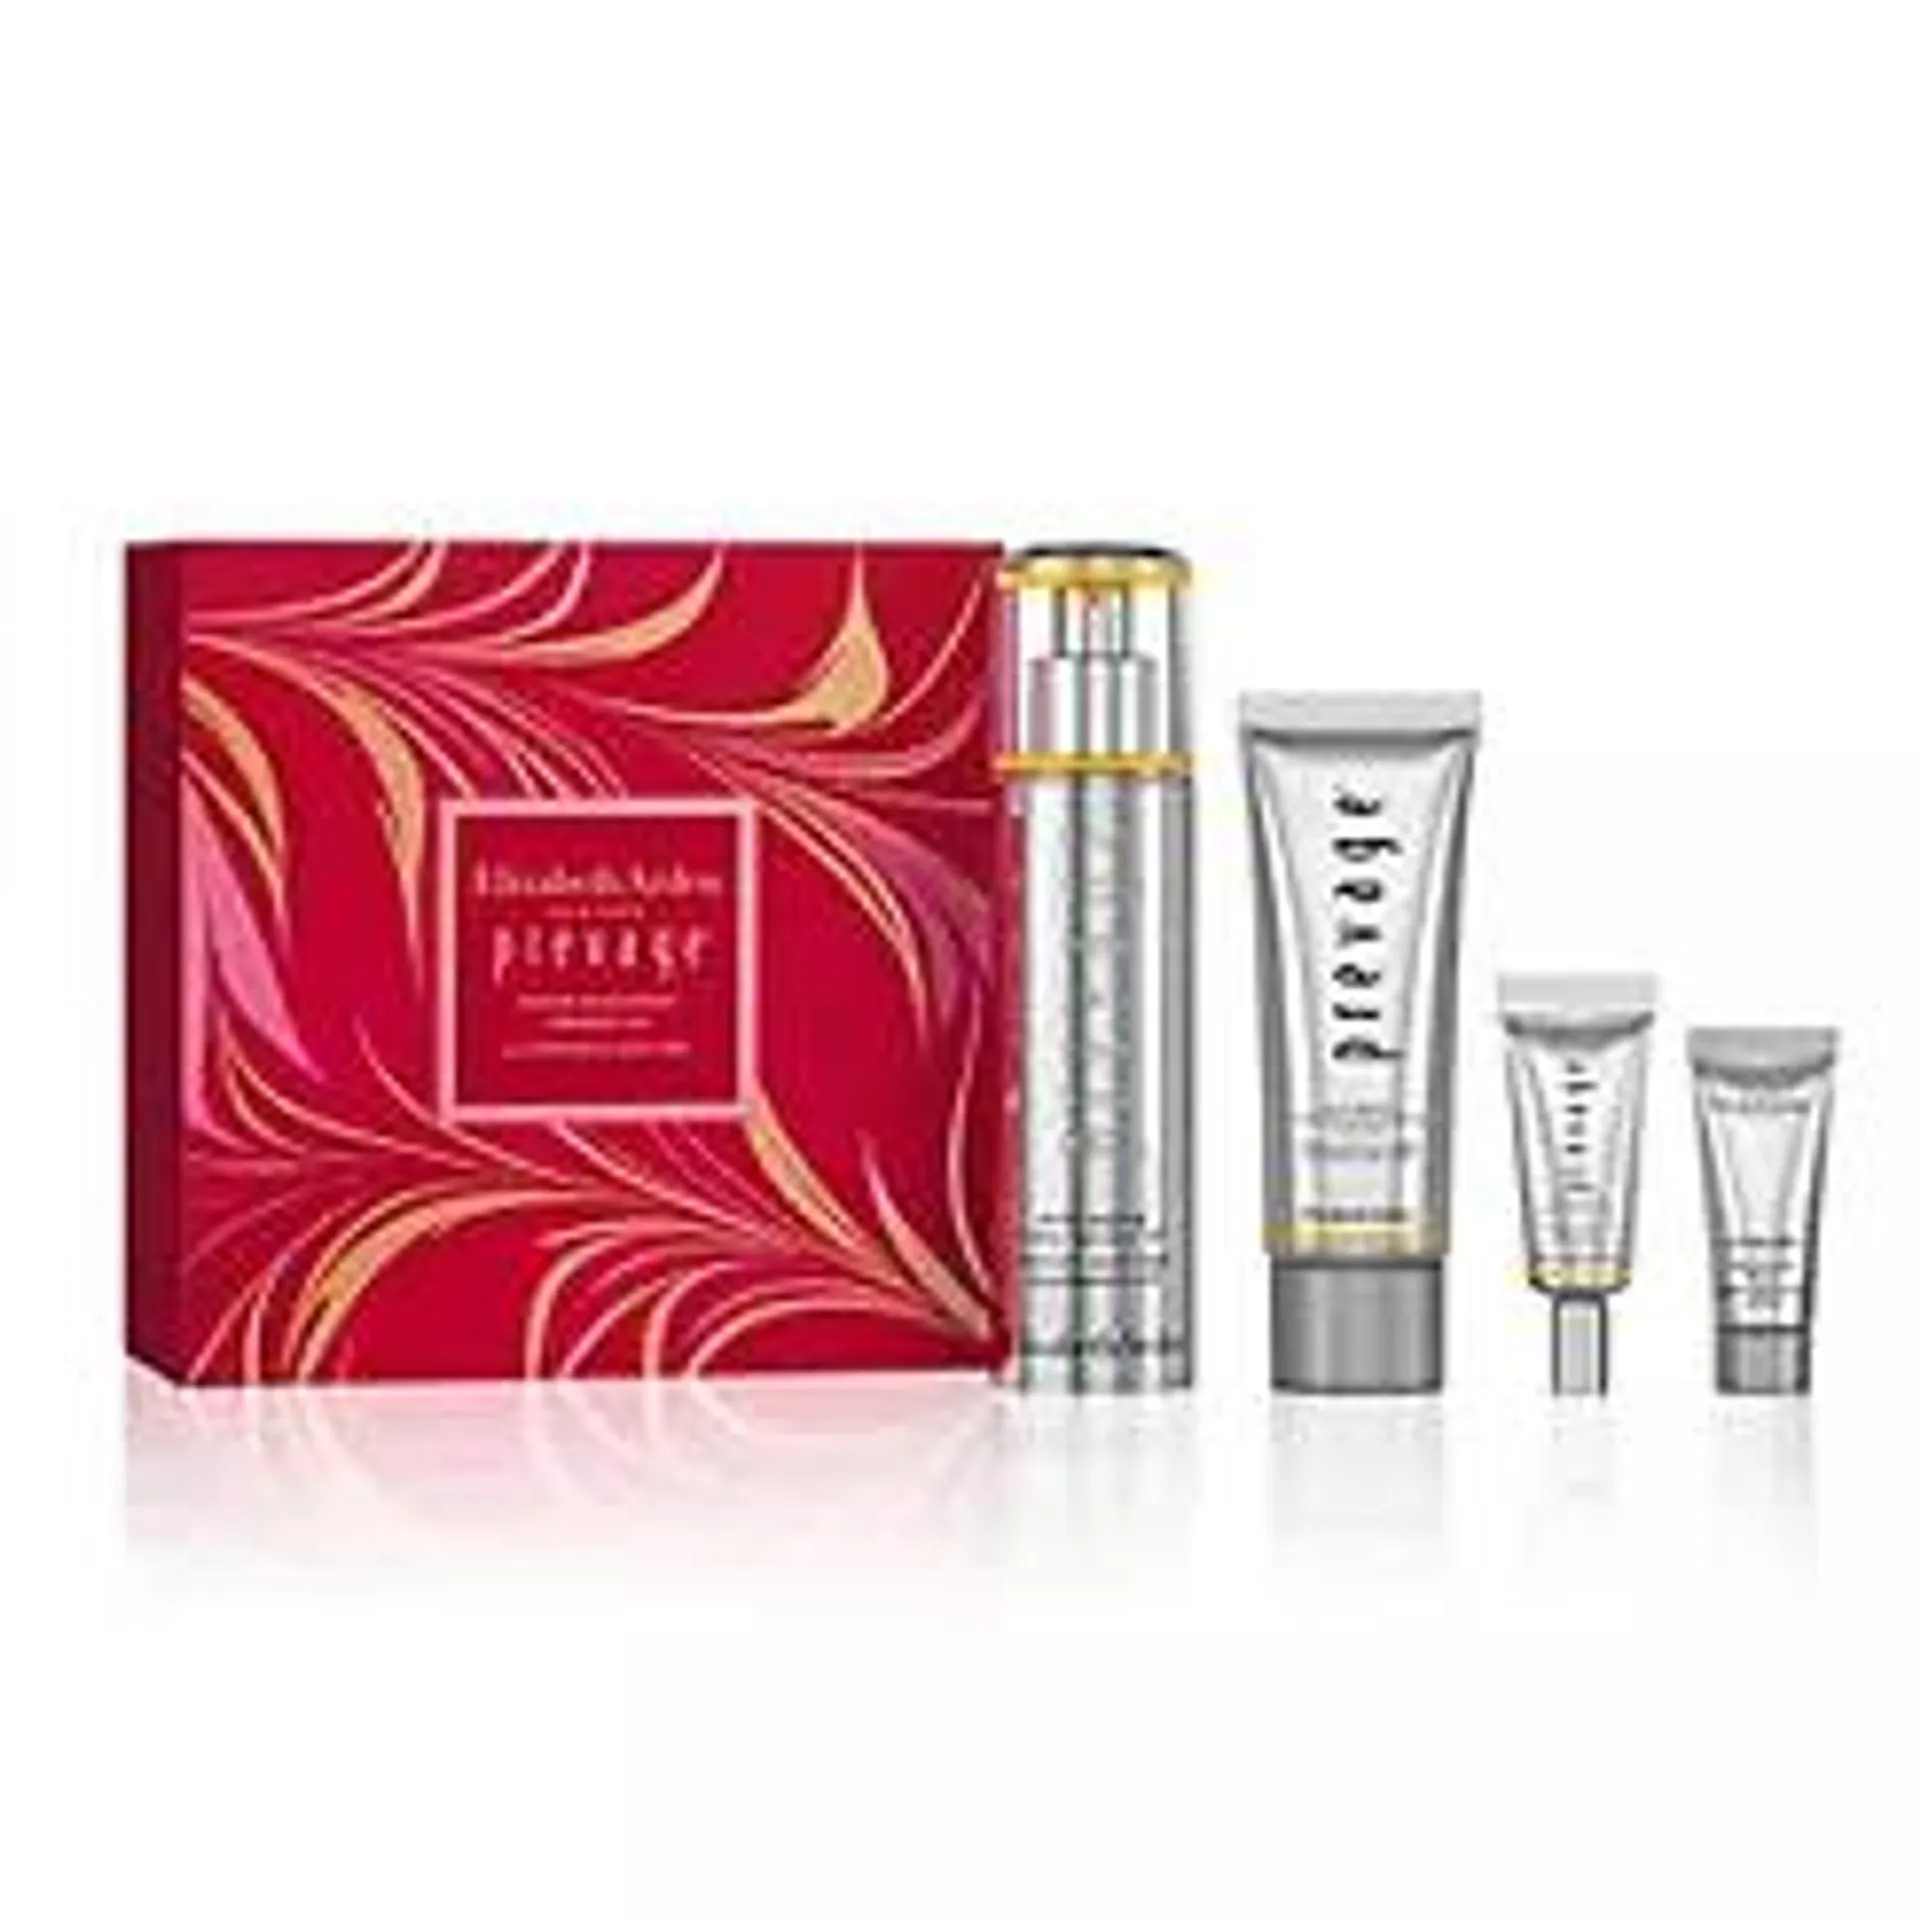 Elizabeth Arden Power In Numbers Prevage 2.0 Anti-Aging Daily Serum 4-piece Gift Set (Worth £241)